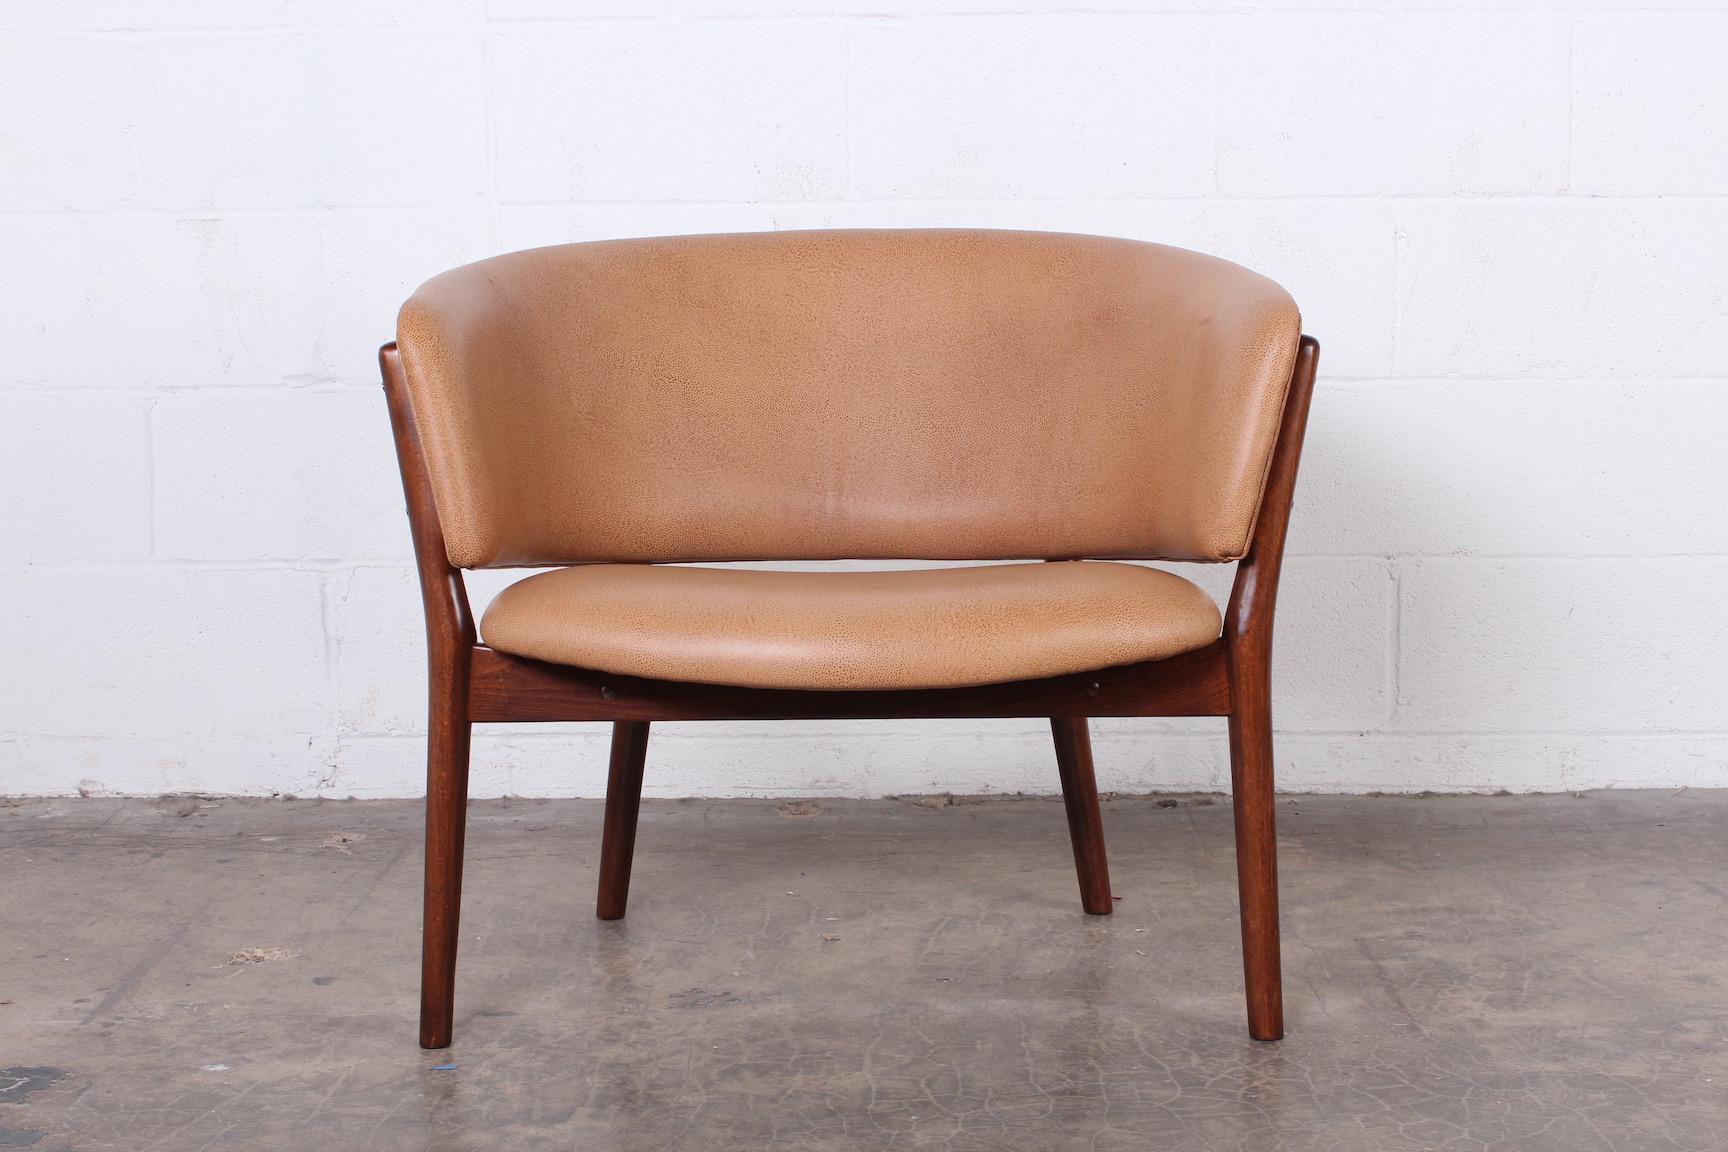 Nanna Ditzel lounge chair in teak and leather.